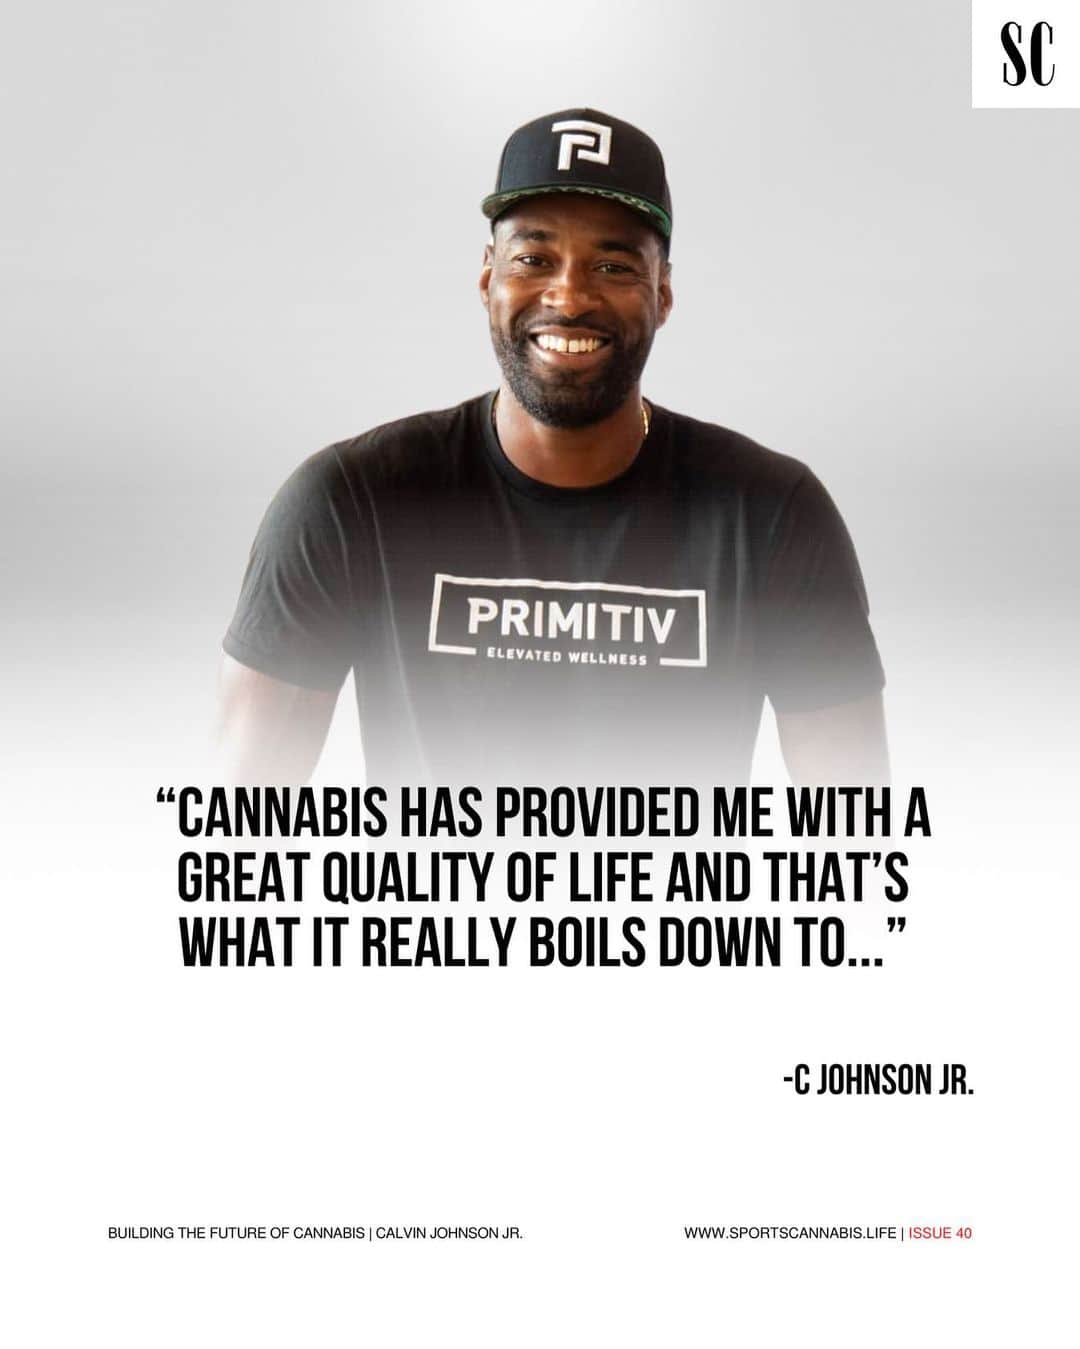 カルビン・ジョンソンのインスタグラム：「Retired NFL legend, global icon and entrepreneur Calvin “ @megatron “ Johnson Jr. is changing the audible for athletes around the globe advocating for cannabis;  “Cannabis has provided me with a great quality of life and that’s what it really boils down to…” -C Johnson Jr.  Johnson played nine seasons in the NFL with the Detroit Lions. Nicknamed Megatron, he’s regarded as one of the greatest wide receivers of all time. His career highlights include; a three-time all Pro, Six-time Pro Bowl Team, was the leading receiver two years in a row in 2011’12, held the title for most receptions in 2012, co-lead the NFL for receiving touchdowns ’08 and in 2021 was voted into the Pro Football Hall of Fame.  Known for setting records Johnson has teamed up with former Detroit Lions teammate Rob “ @robsims67 “Sims to create change, push education forward and assist athletes on their health and wellness journey.  Building the future of cannabis, Johnson and Sims have founded Primitiv “ @primitiv_group “, a brand focused on the advancement of cannabis as a form of elevated wellness and improving the quality of life for those in pain.   “Our collective goal is to build around functionality and an ability to keep moving forward, whether that’s with everyday pains, aches and, or chronic pain, swelling.  I use topicals all the time to assist with my swelling and aches and it helps tremendously.  I’m able to stay on my feet, moving forward and able to take on the next day without worrying about any setbacks.  With constant movement, there’s hydration, replenishment and to be able to add Nano-Cannabinoids to products is a huge bonus.  It allows us to move in harmony with everyday athletes and their personal routines and ensure they also have quality of life…” adding “We ultimately wanted to highlight the essence of the plant while giving value to the rich history of cannabis as a clean natural healing alternative…” -C Johnson Jr.  Learn About His Movement Today; WWW.SPORTSCANNABIS.LIFE  📸 by @fatherpetemisty」